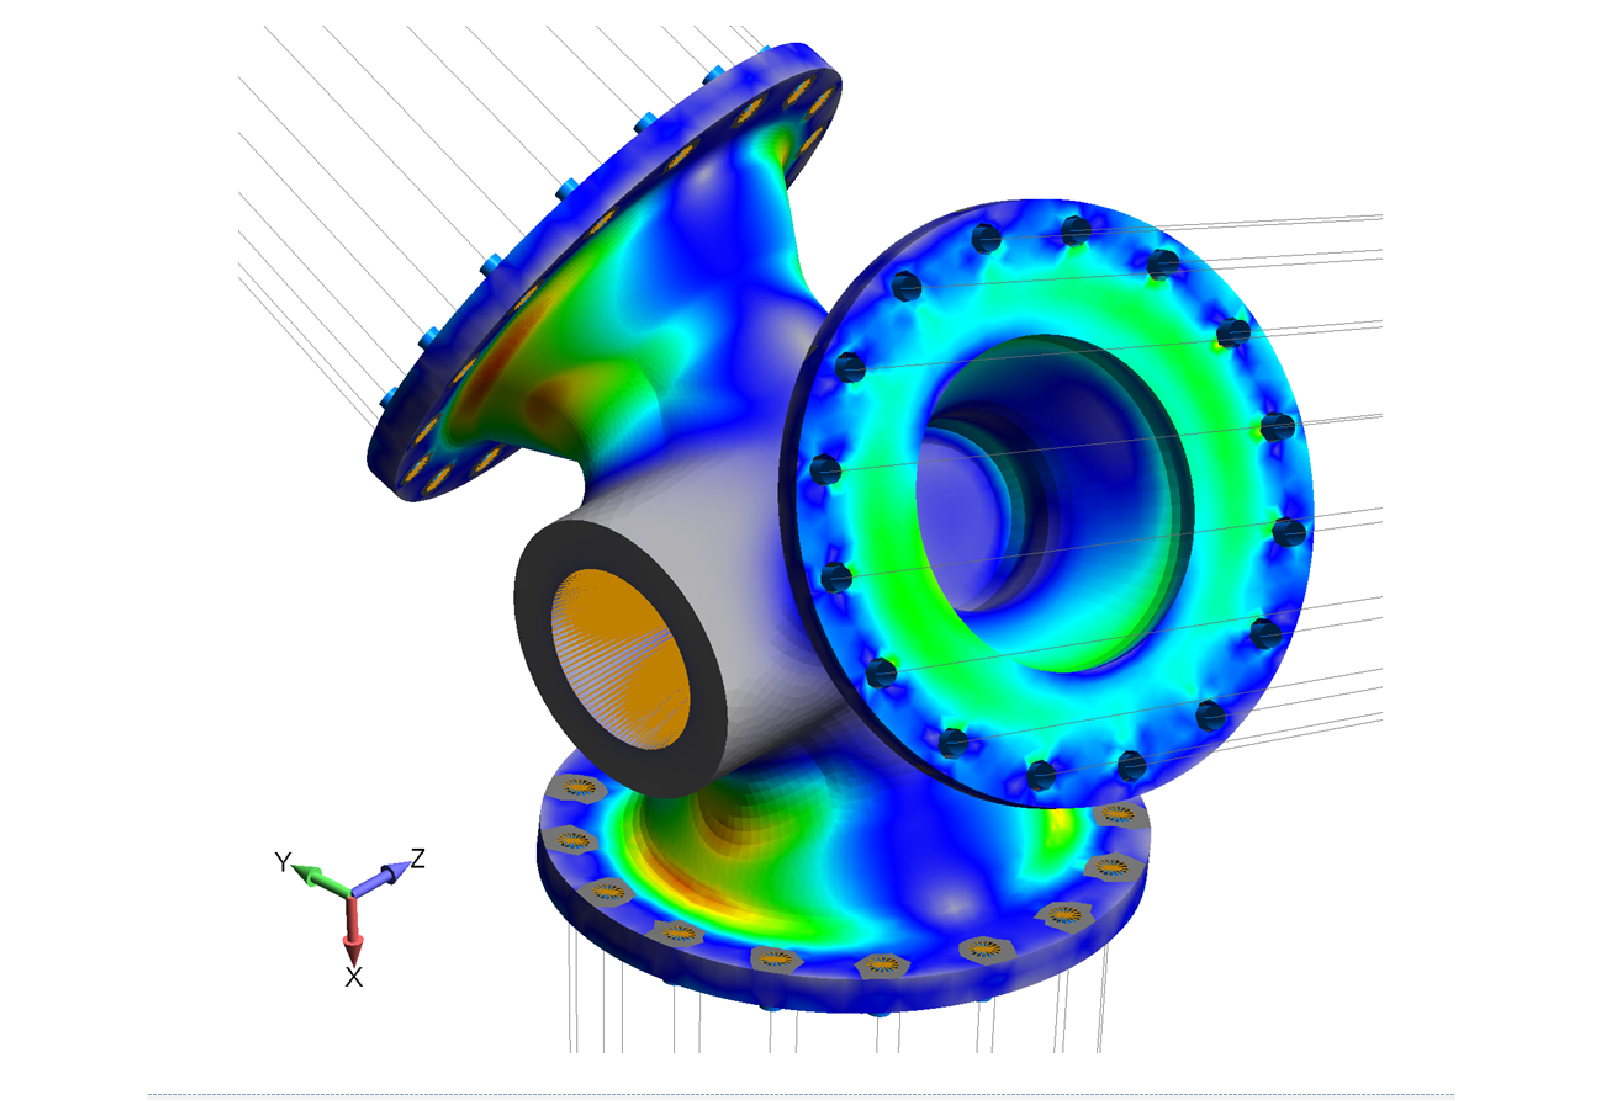 FEA simulation of 50 kW wind turbine blade hub.  The lines are rigid links (RBE2) used to apply the blade loads onto the hub.